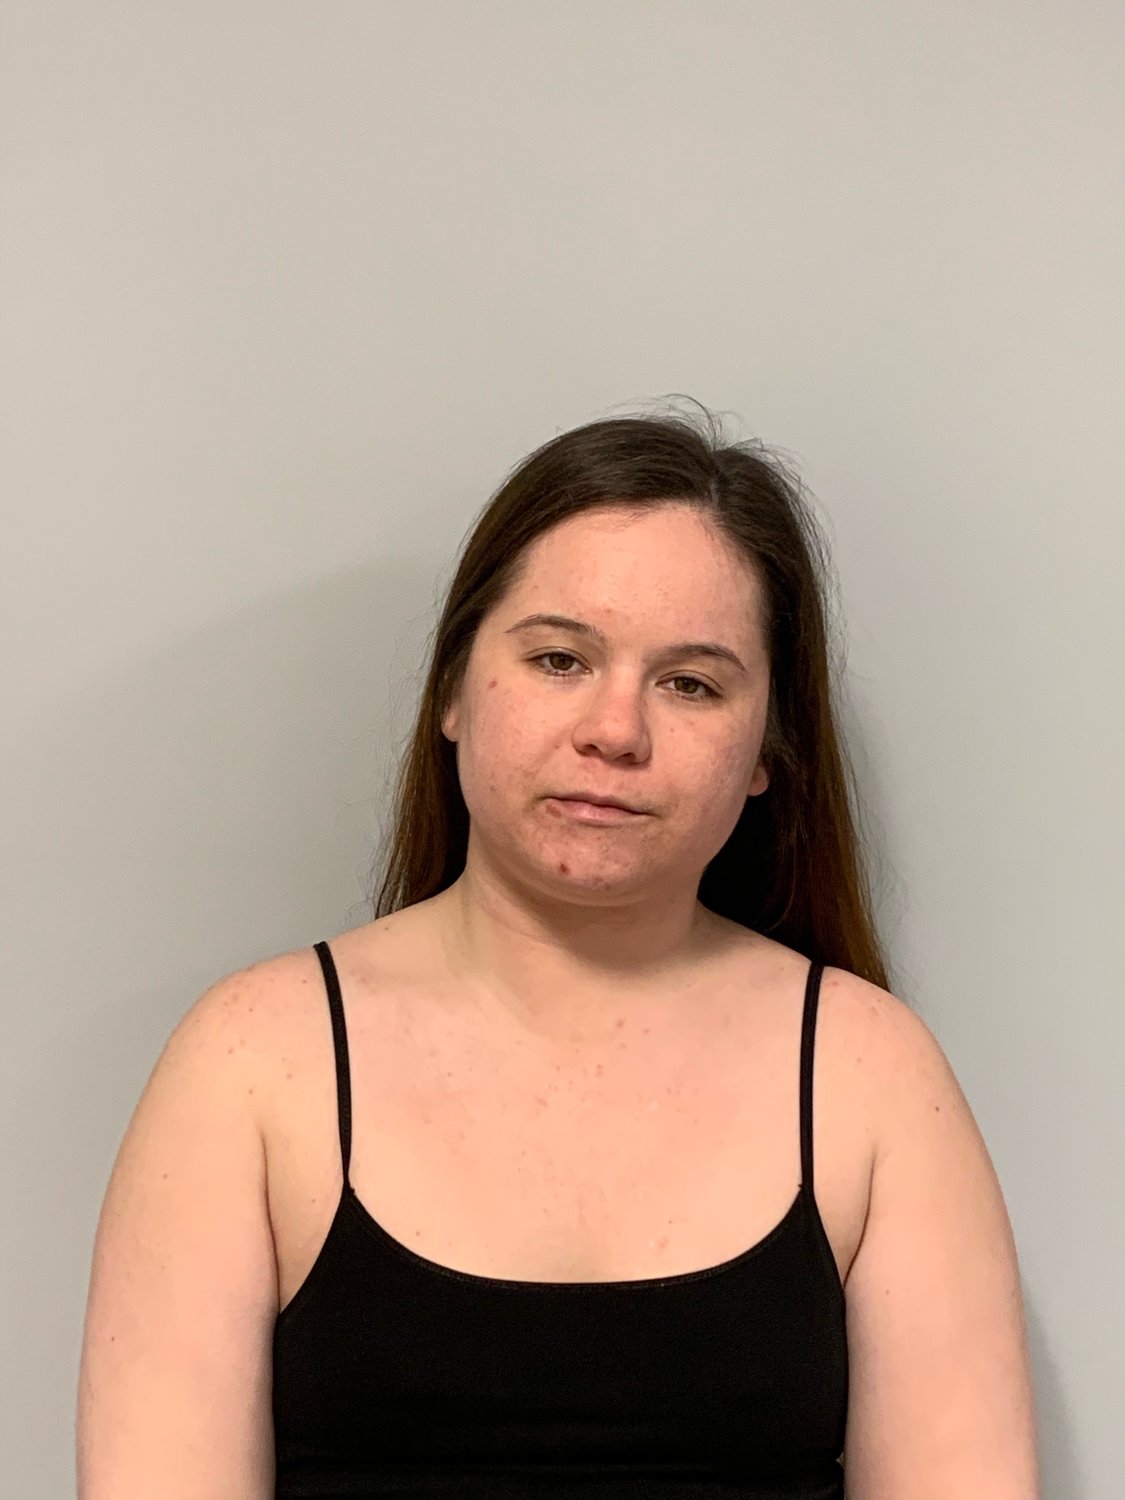 Portsmouth Police booking photo of Ashley N. Pierce.